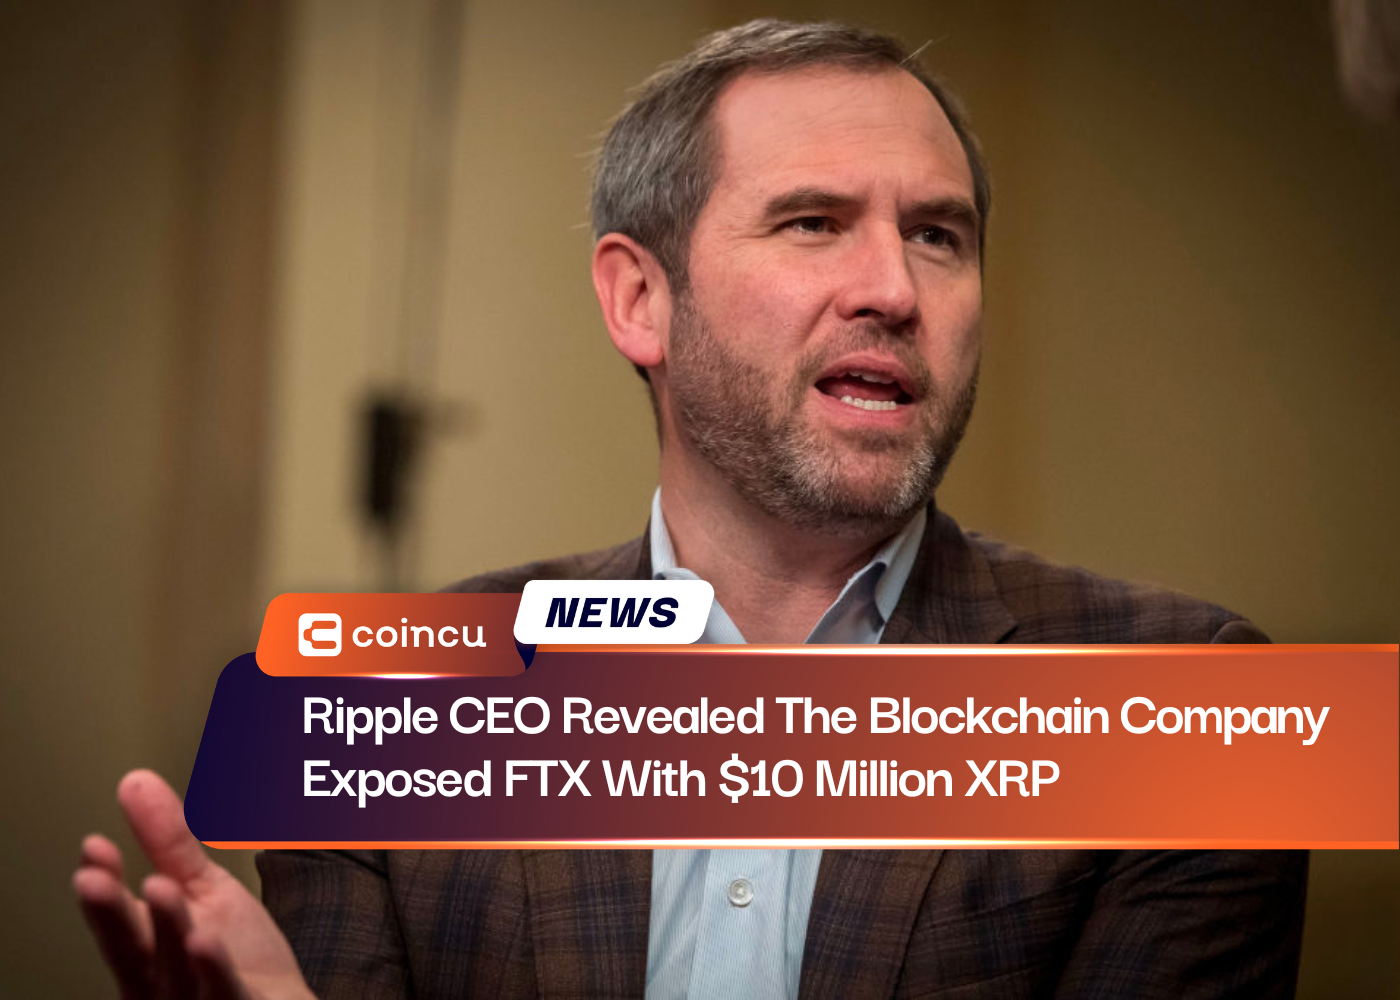 Ripple CEO Revealed The Blockchain Company Exposed FTX With $10 Million XRP